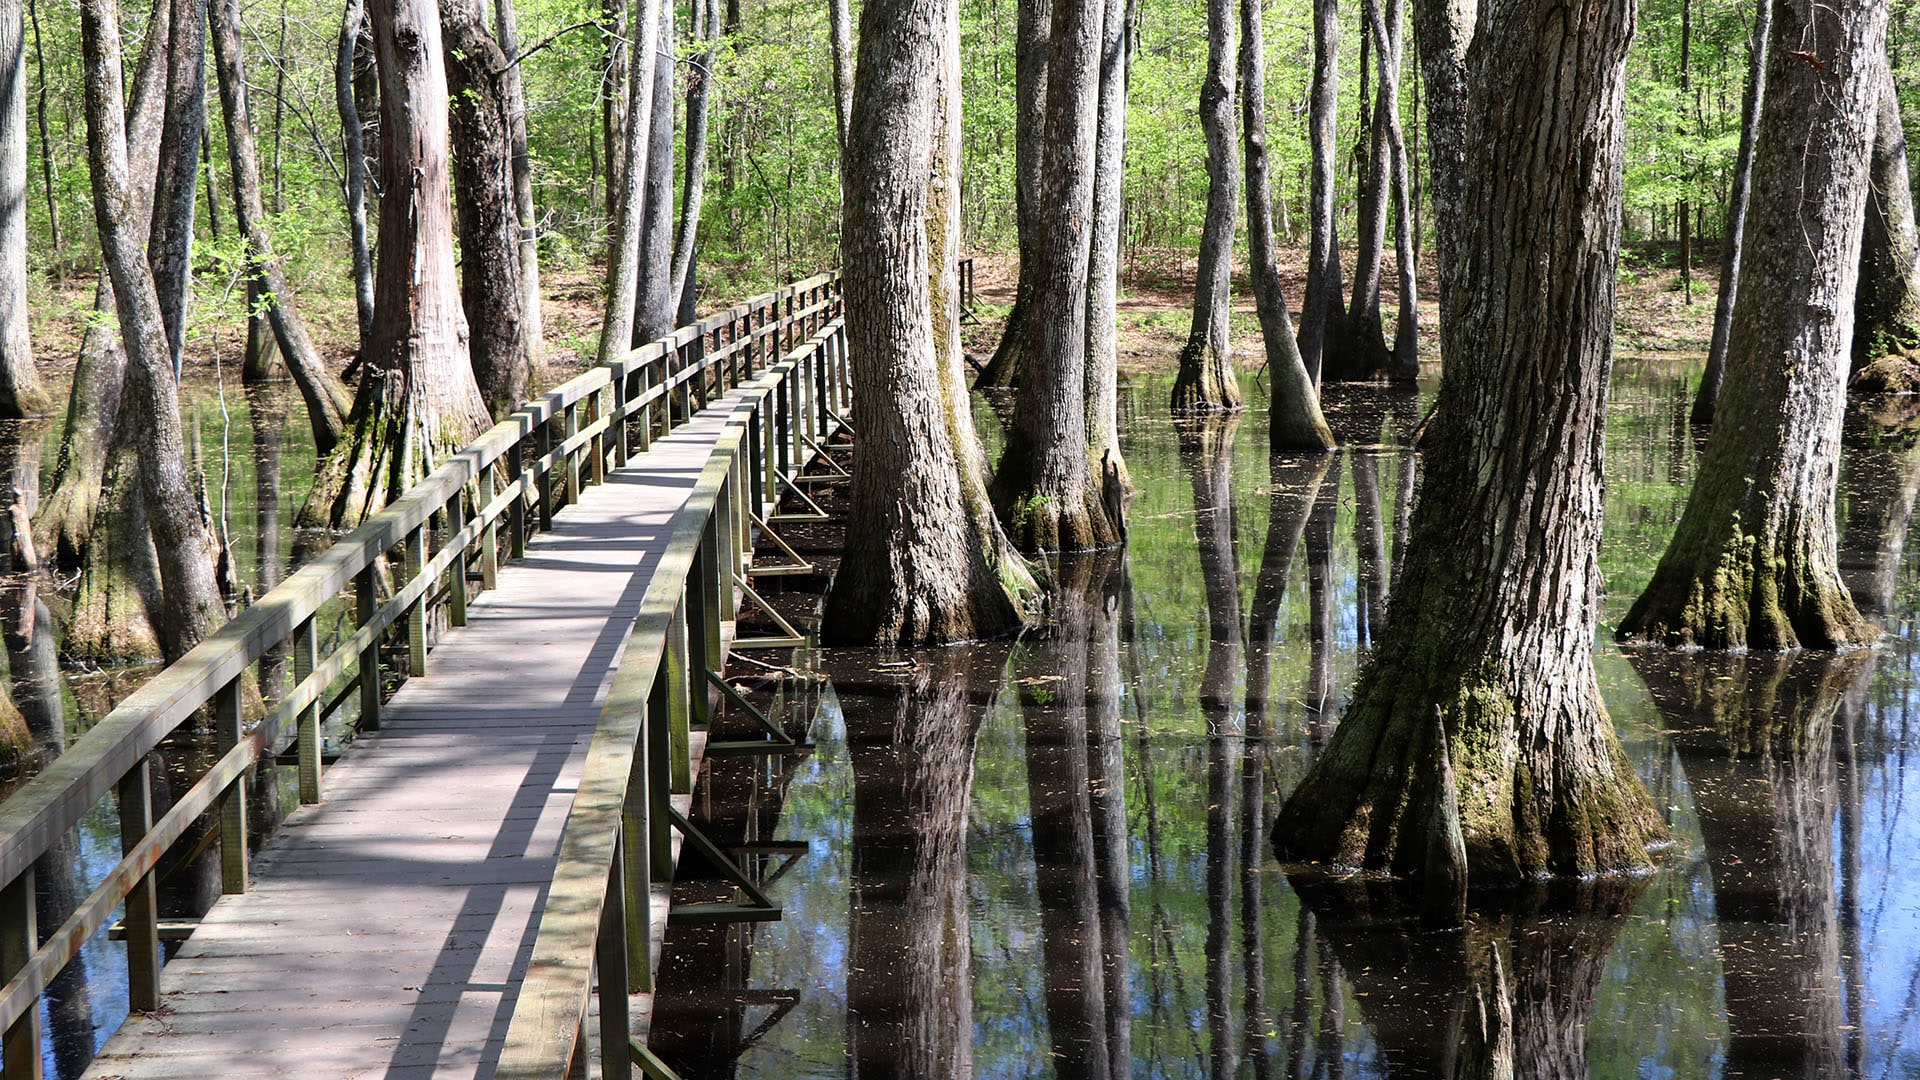 A boardwalk takes visitors into a cypress swamp along the Natchez Trace Parkway.